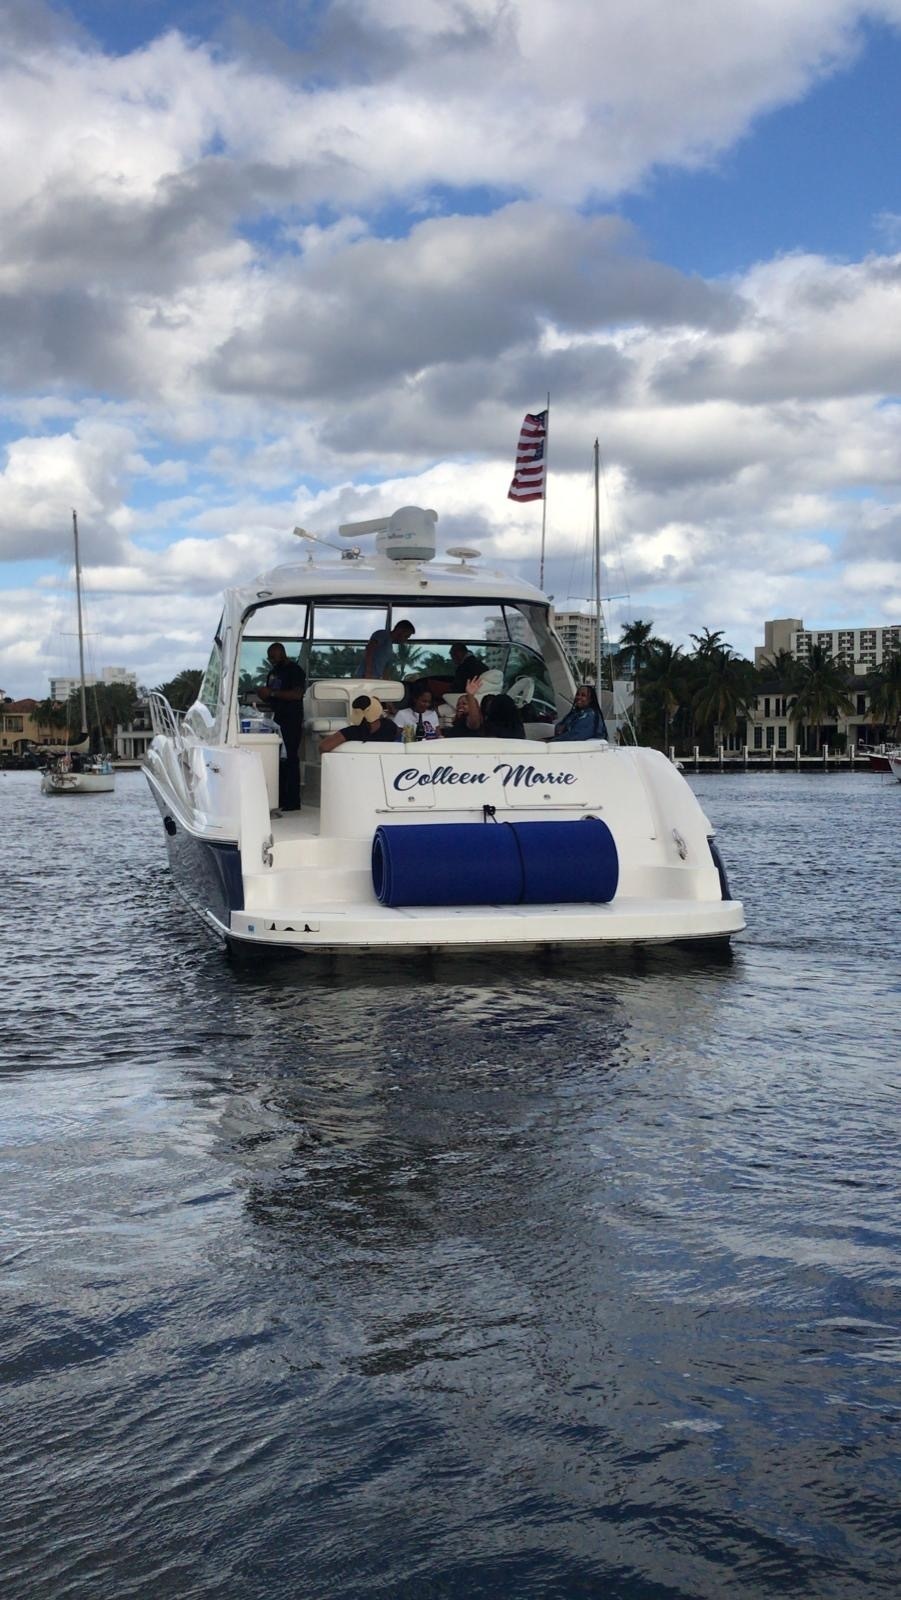 Coast Guard stops illegal charter near Fort Lauderdale